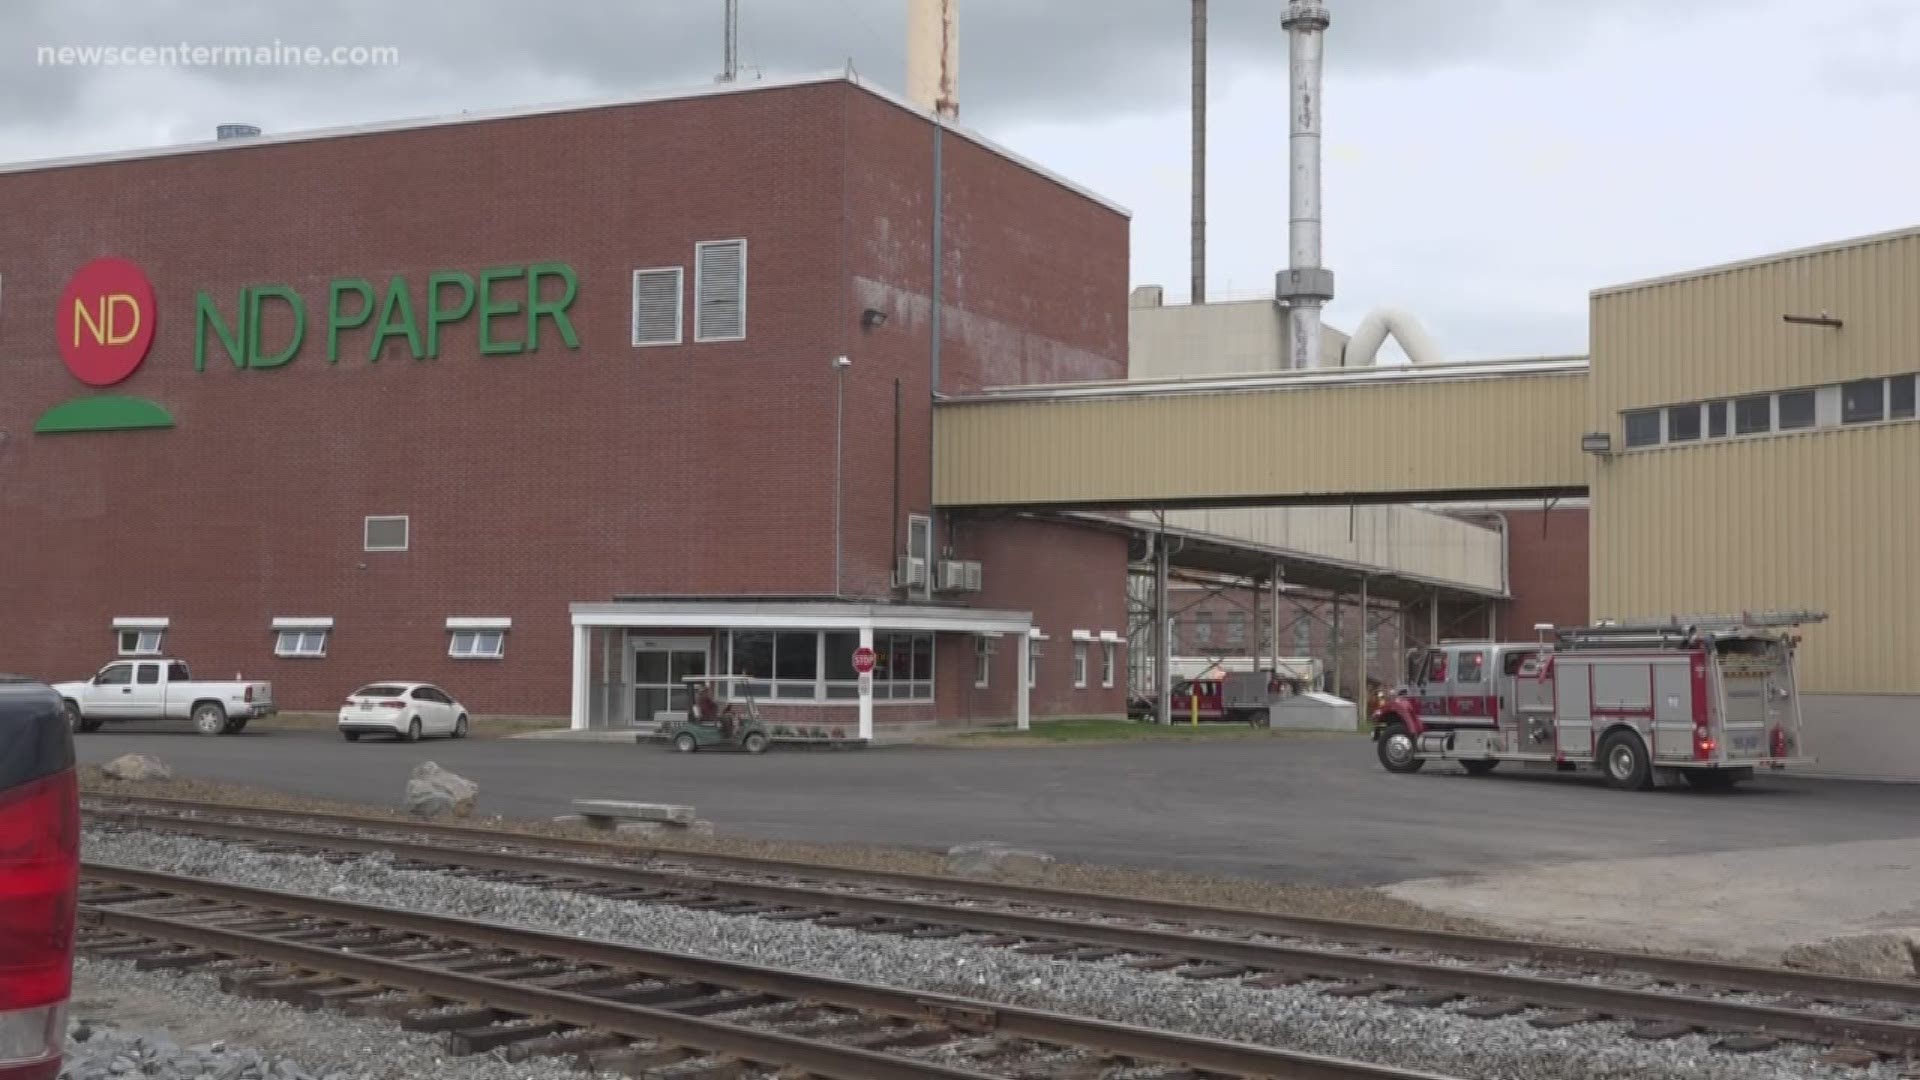 Two firefighters were injured this morning as they helped extinguish a fire at the newly reopened Old Town Pulp Mill.